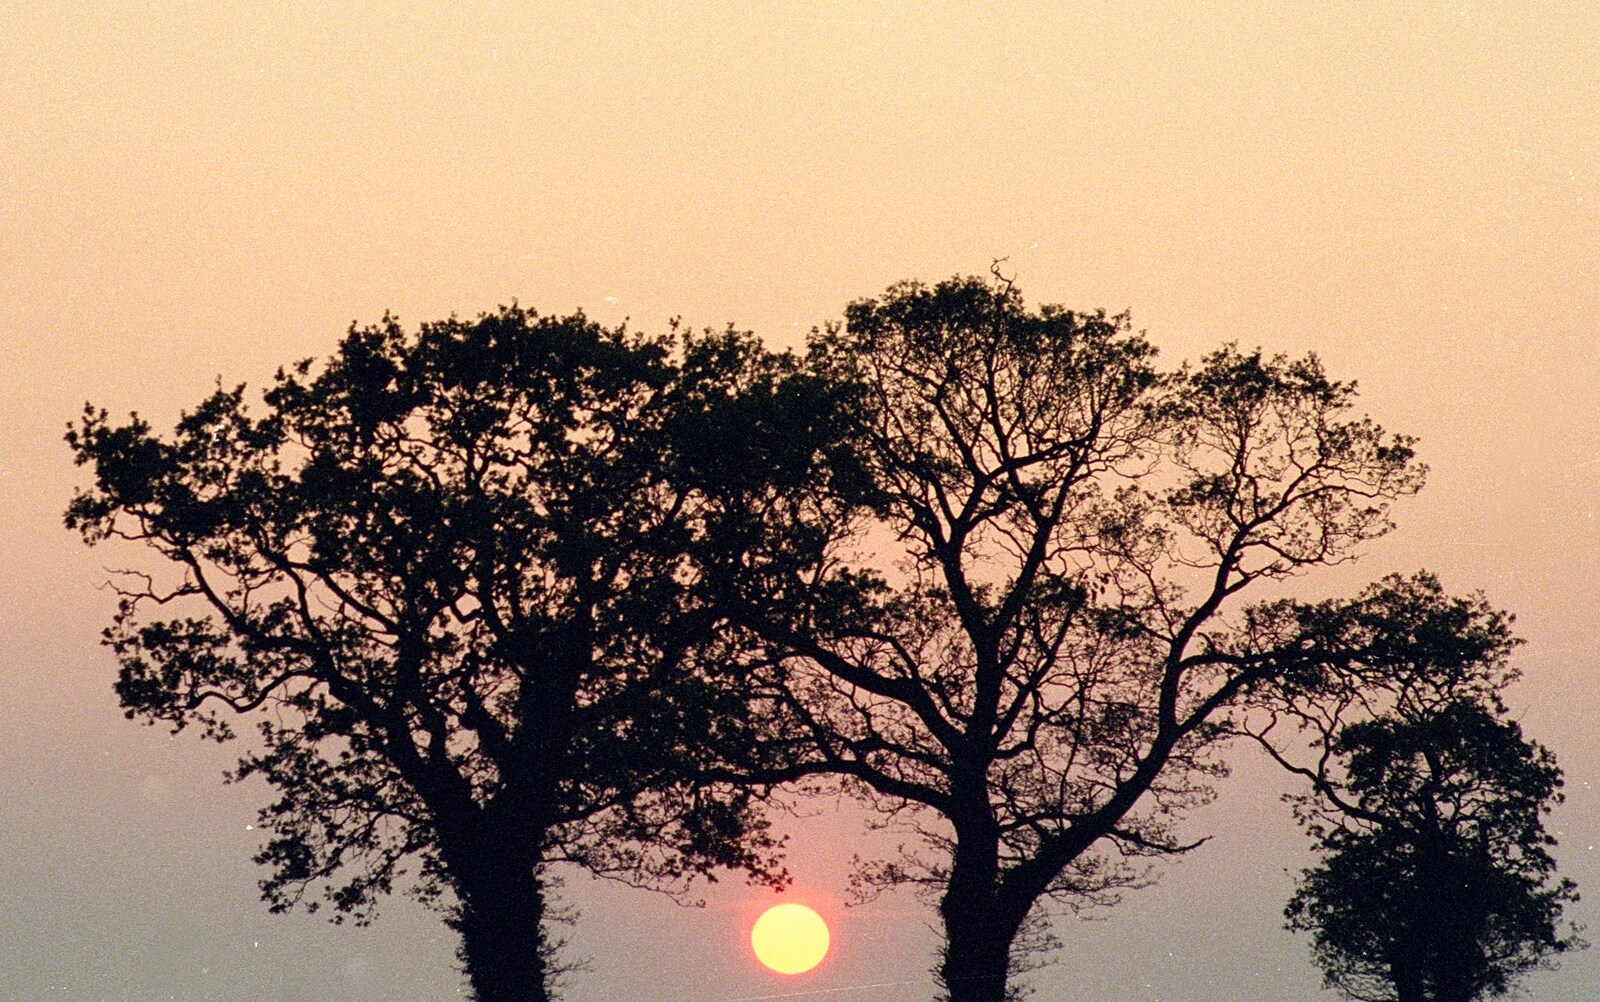 Sunset through trees from Somans: Nosher's 21st Birthday at the Soman-Wherry Press, Norwich, Norfolk - 26th May 1988